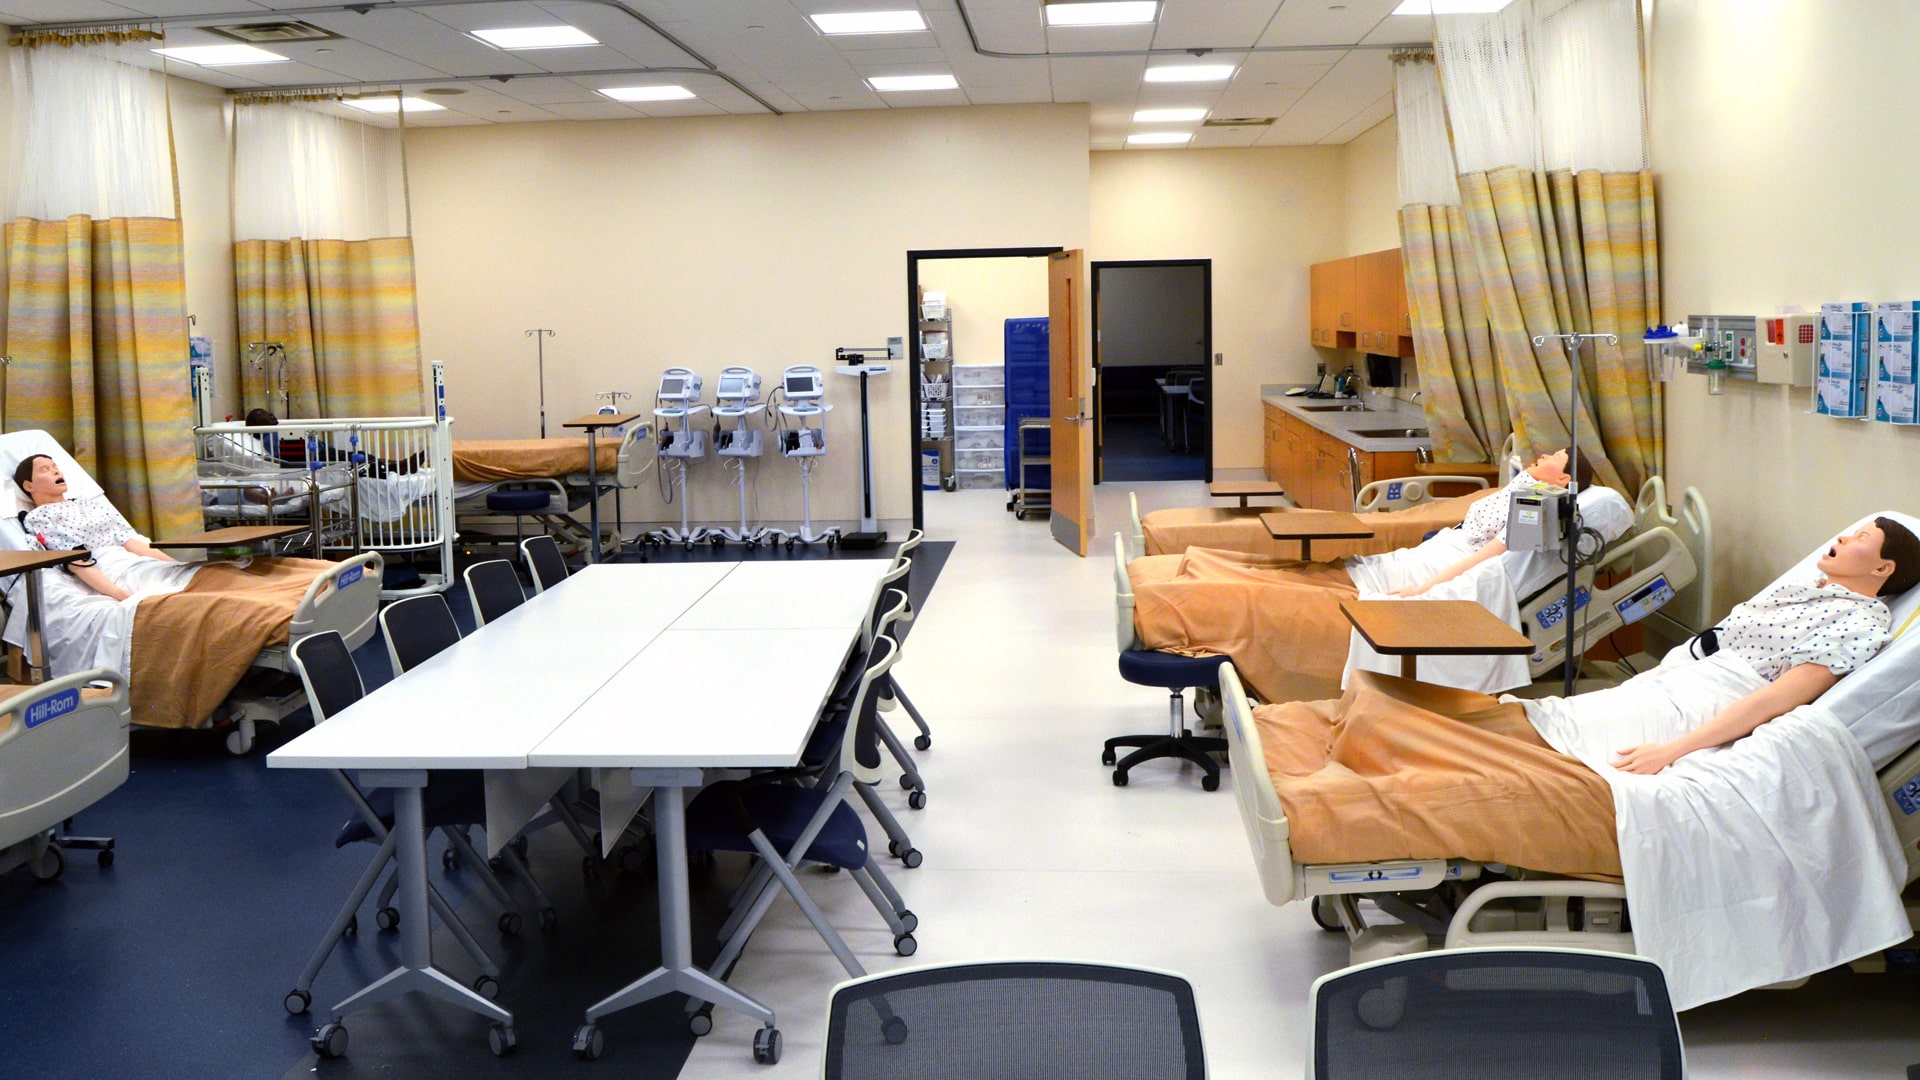 View of the central simulation center that is part of JWU Charlotte’s Nursing lab suites and facilities.